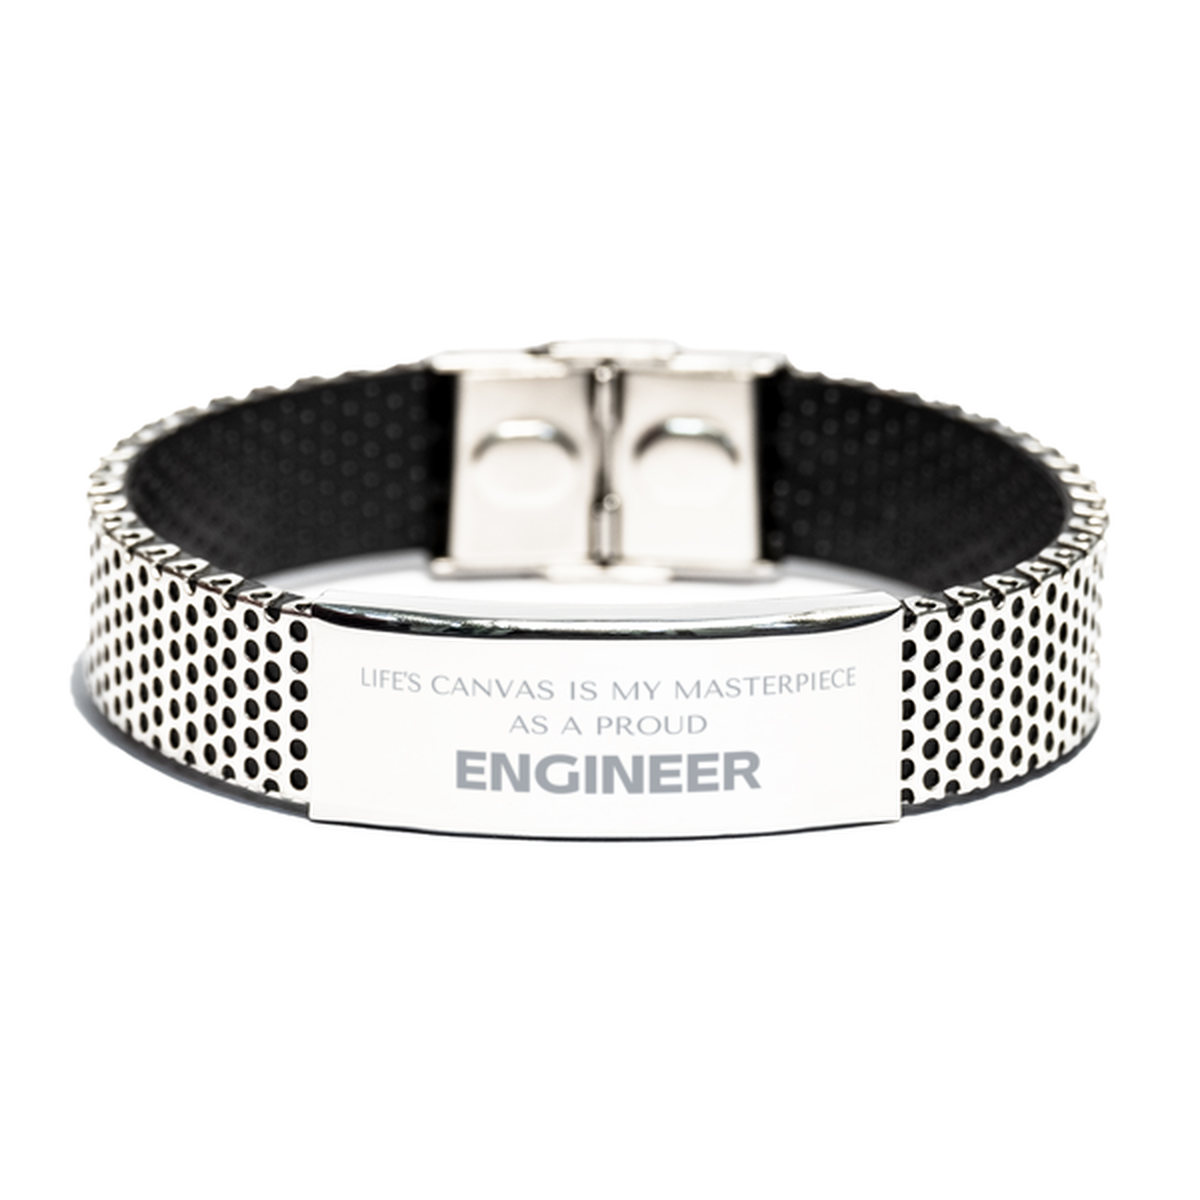 Proud Engineer Gifts, Life's canvas is my masterpiece, Epic Birthday Christmas Unique Stainless Steel Bracelet For Engineer, Coworkers, Men, Women, Friends